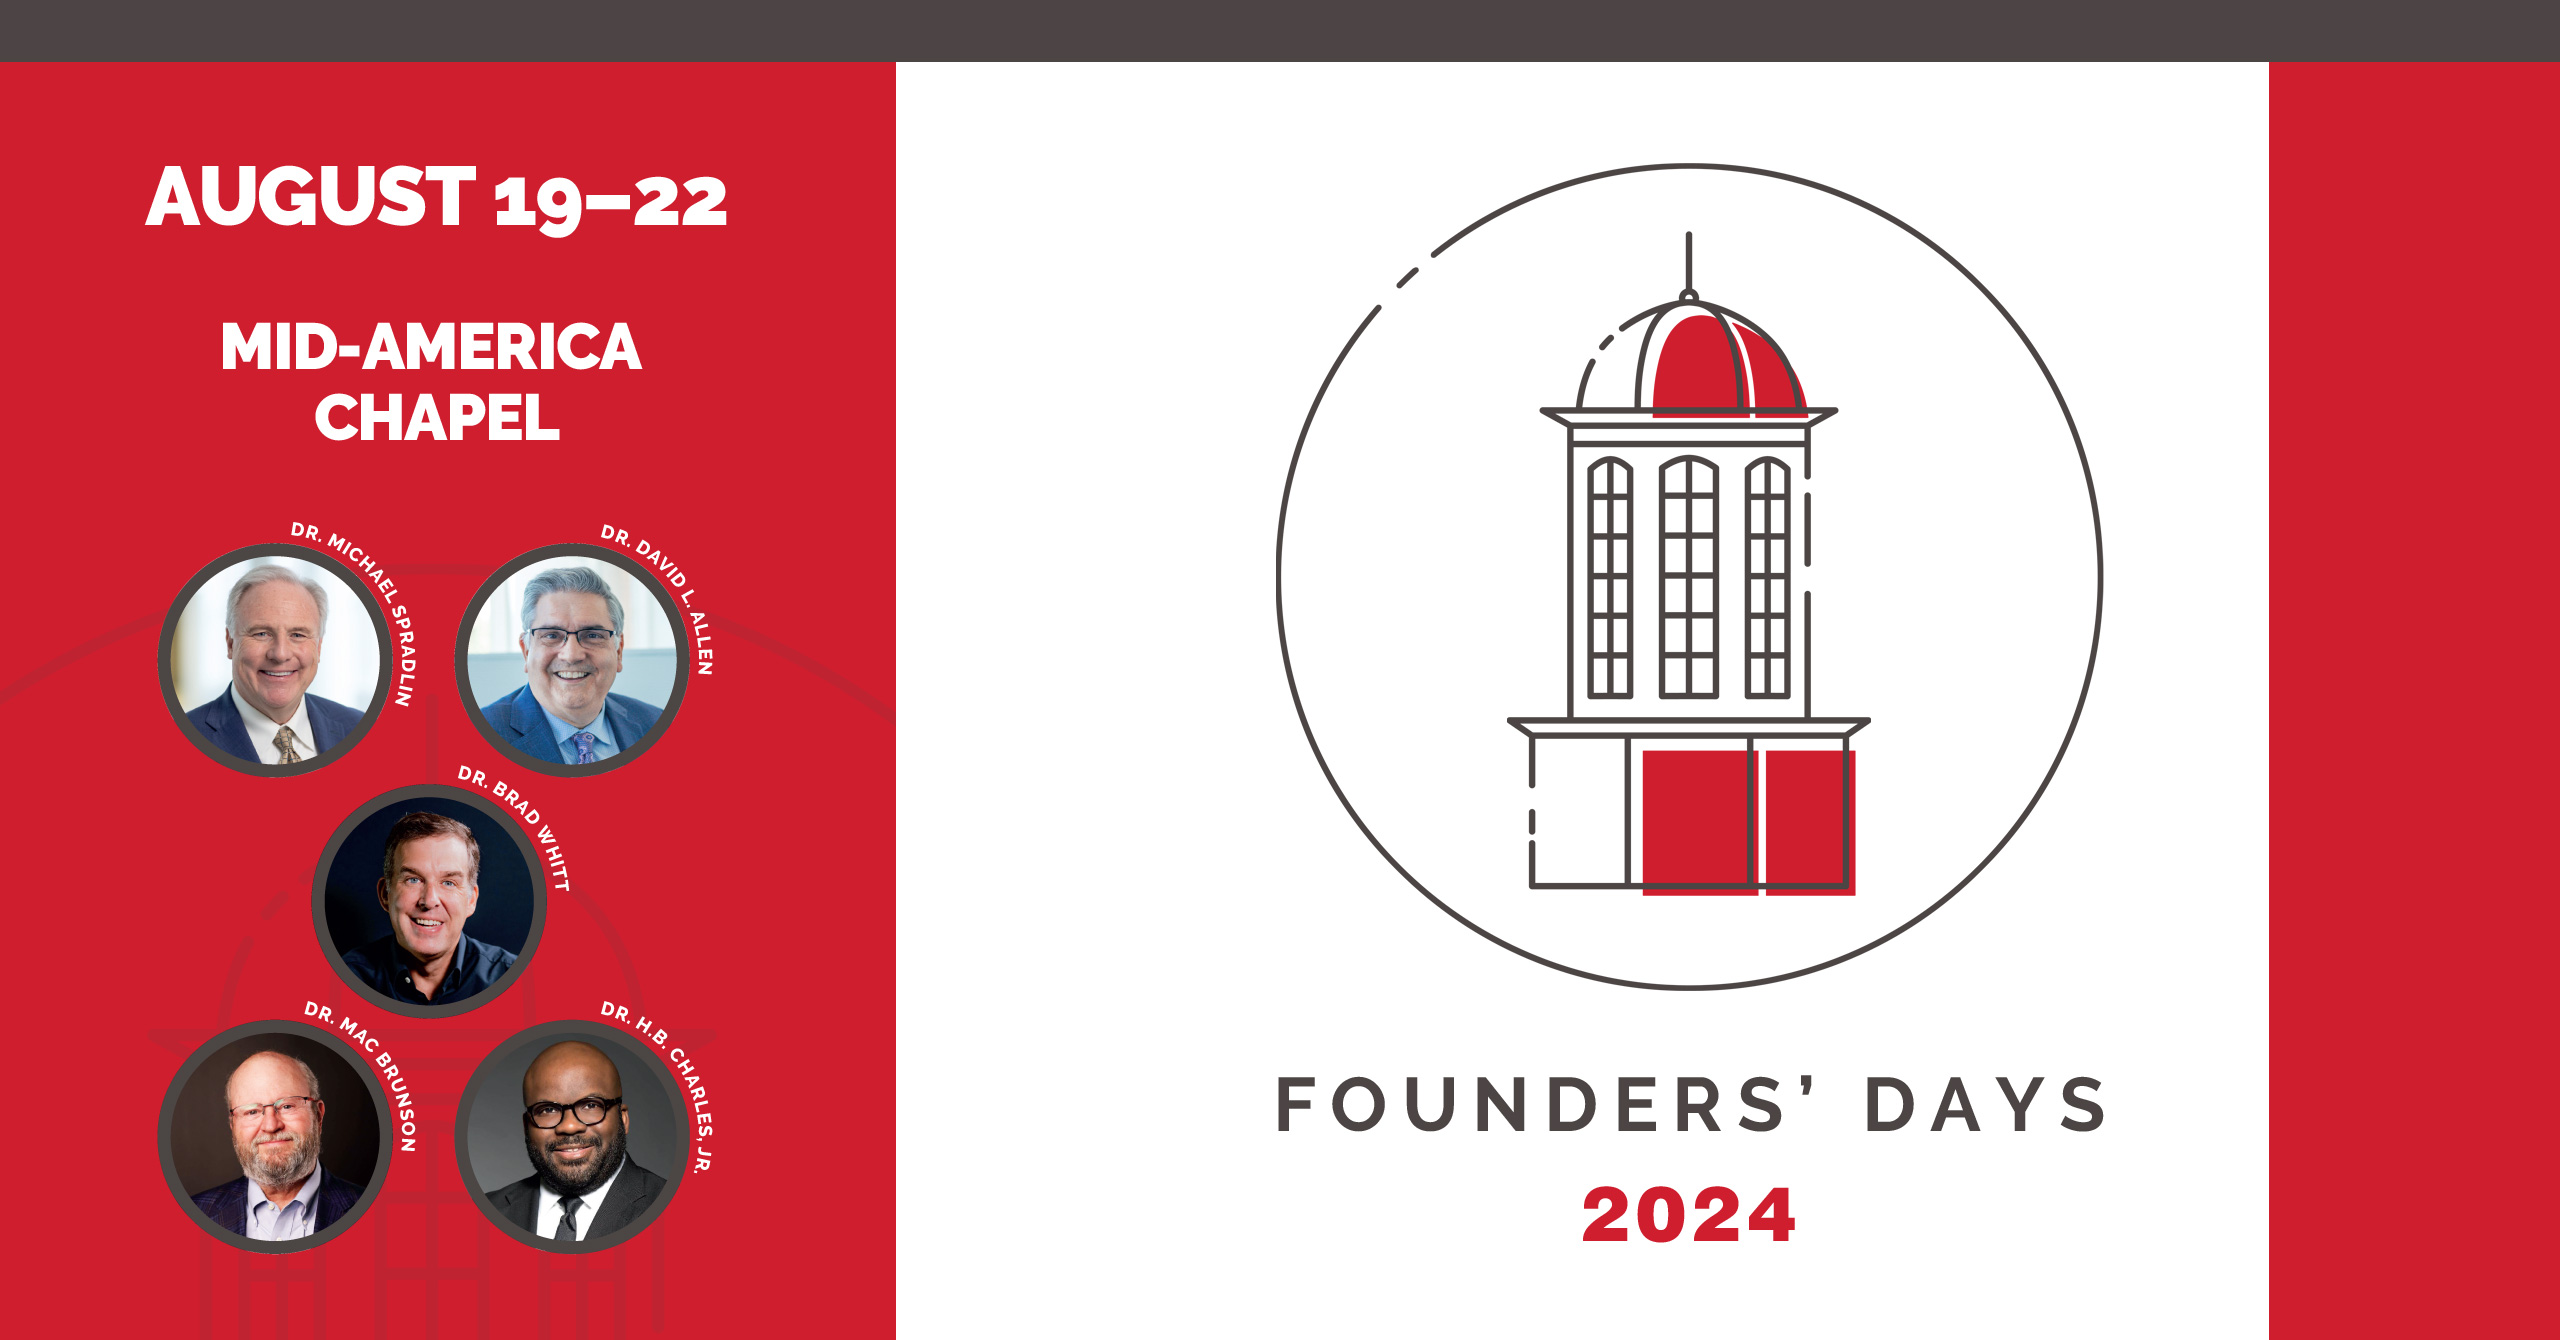 Founders' Days